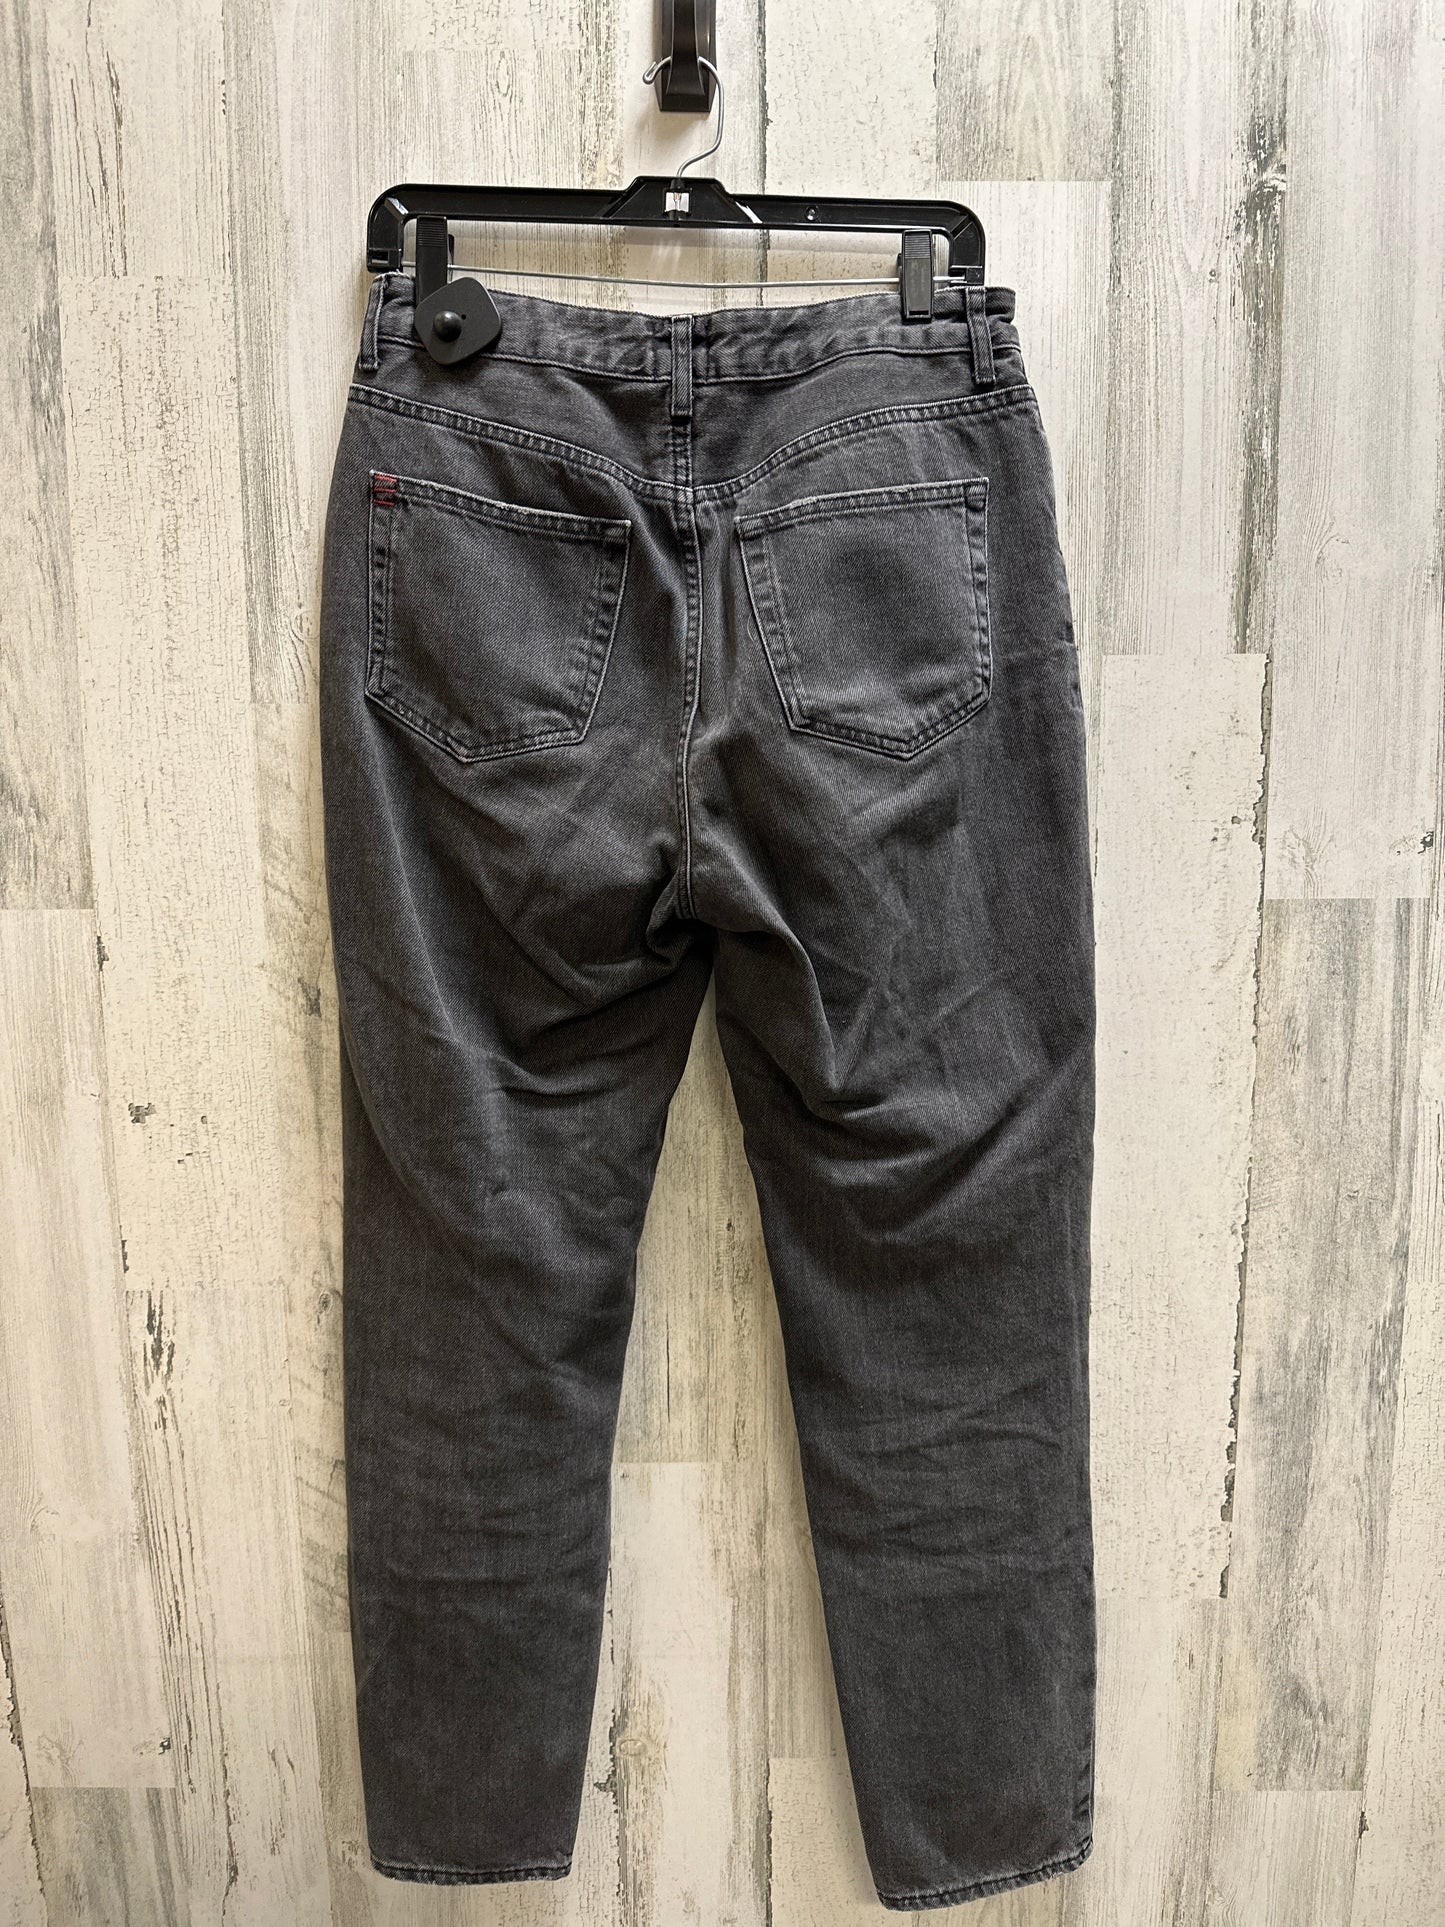 Jeans Relaxed/boyfriend By Urban Outfitters  Size: 6